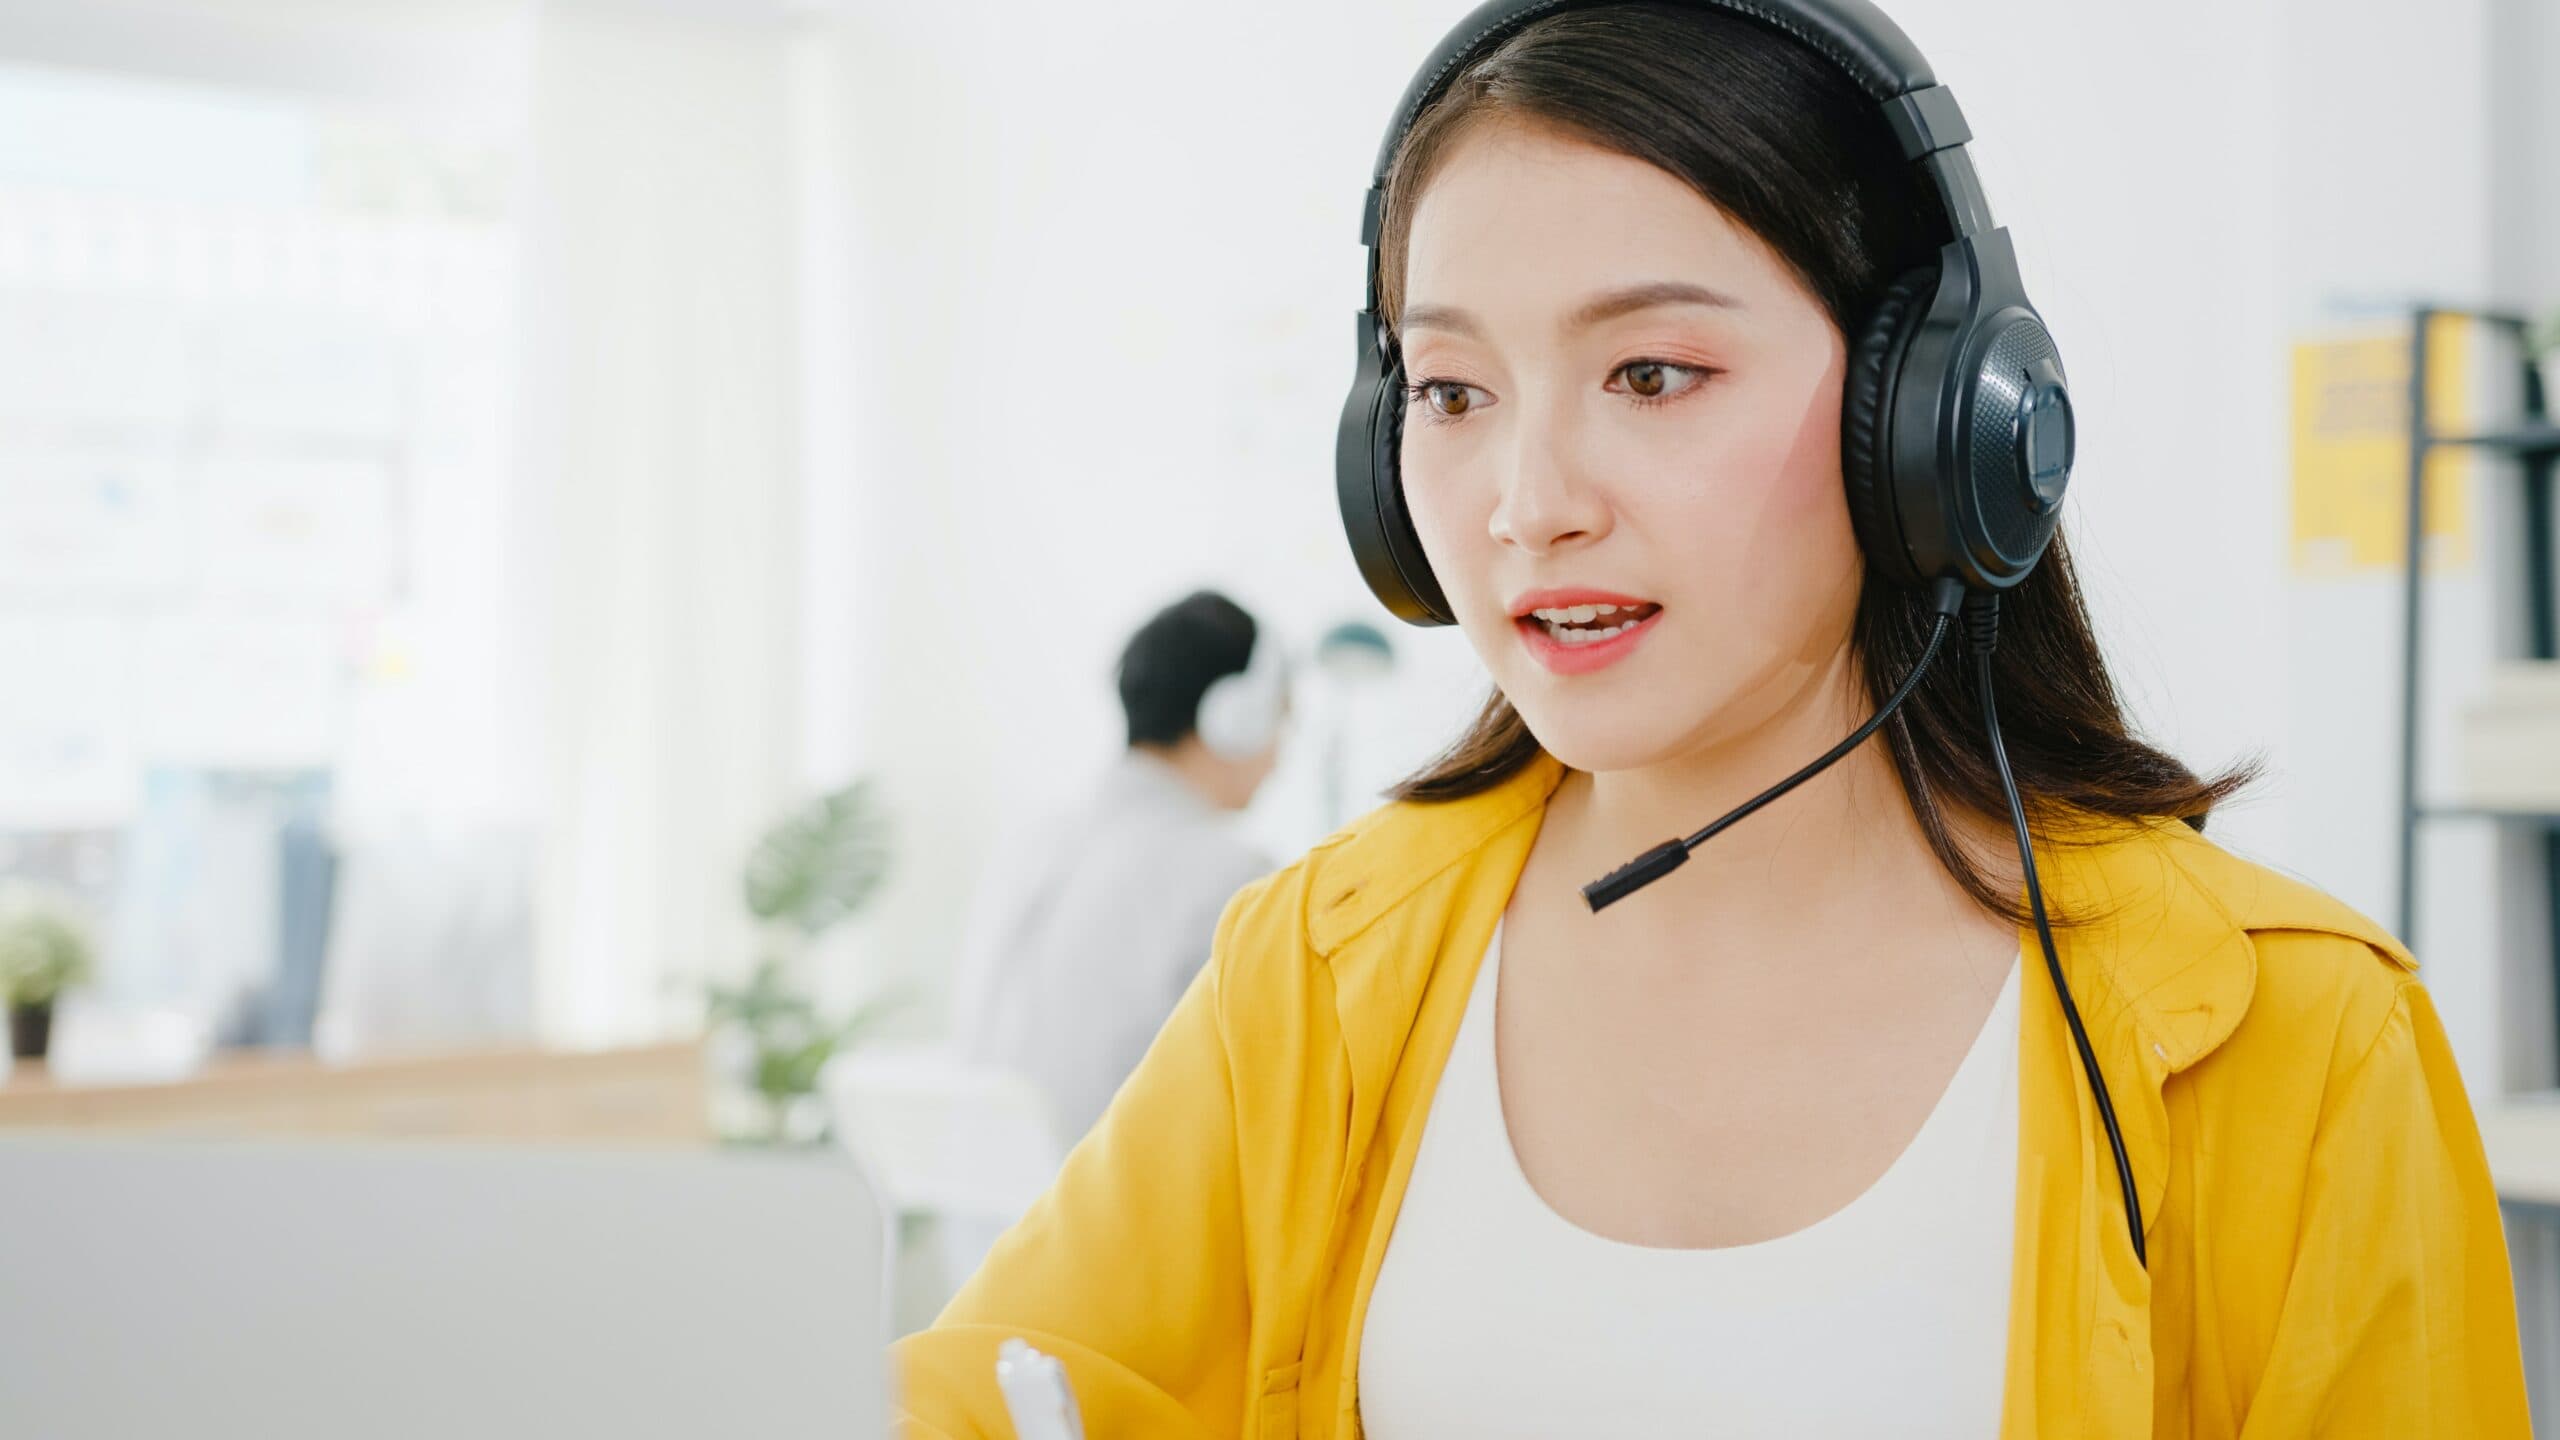 Woman in headset providing technical support in the office for ConnectWise password reset.